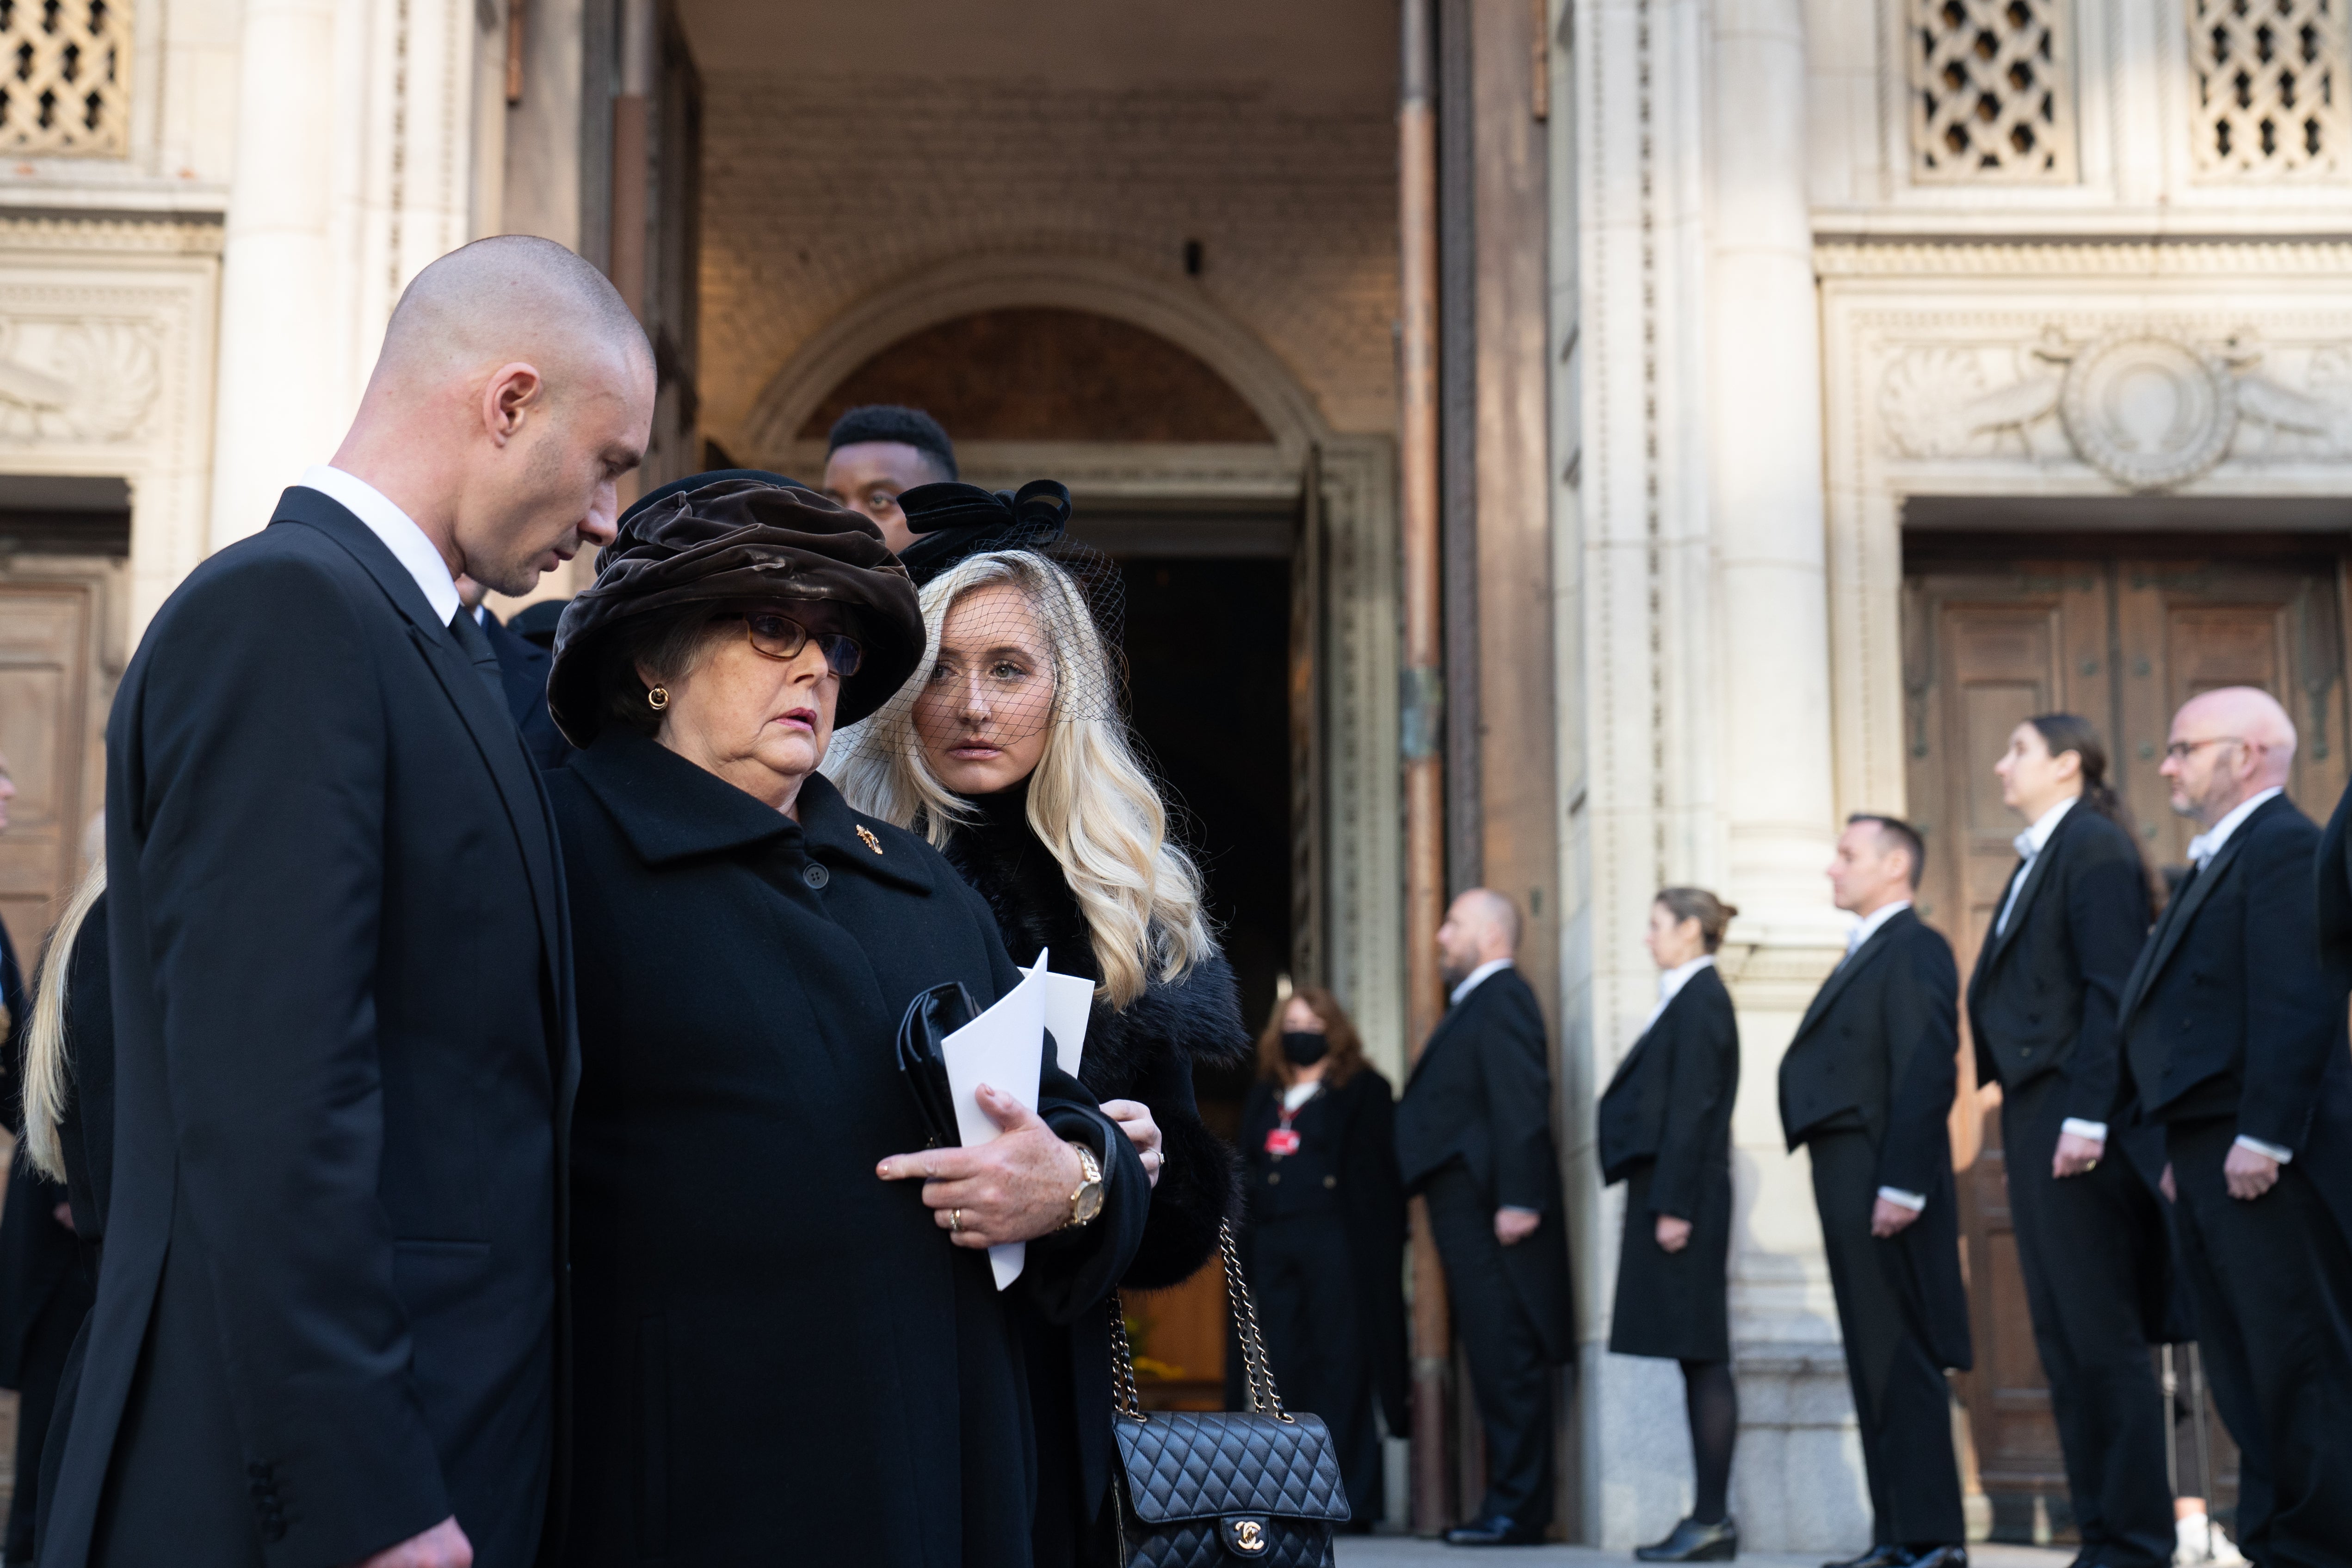 Julia Amess (centre), the widow of Sir David Amess, is comforted by her family following the requiem mass for Sir David at Westminster Cathedral (Stefan Rousseau/PA)